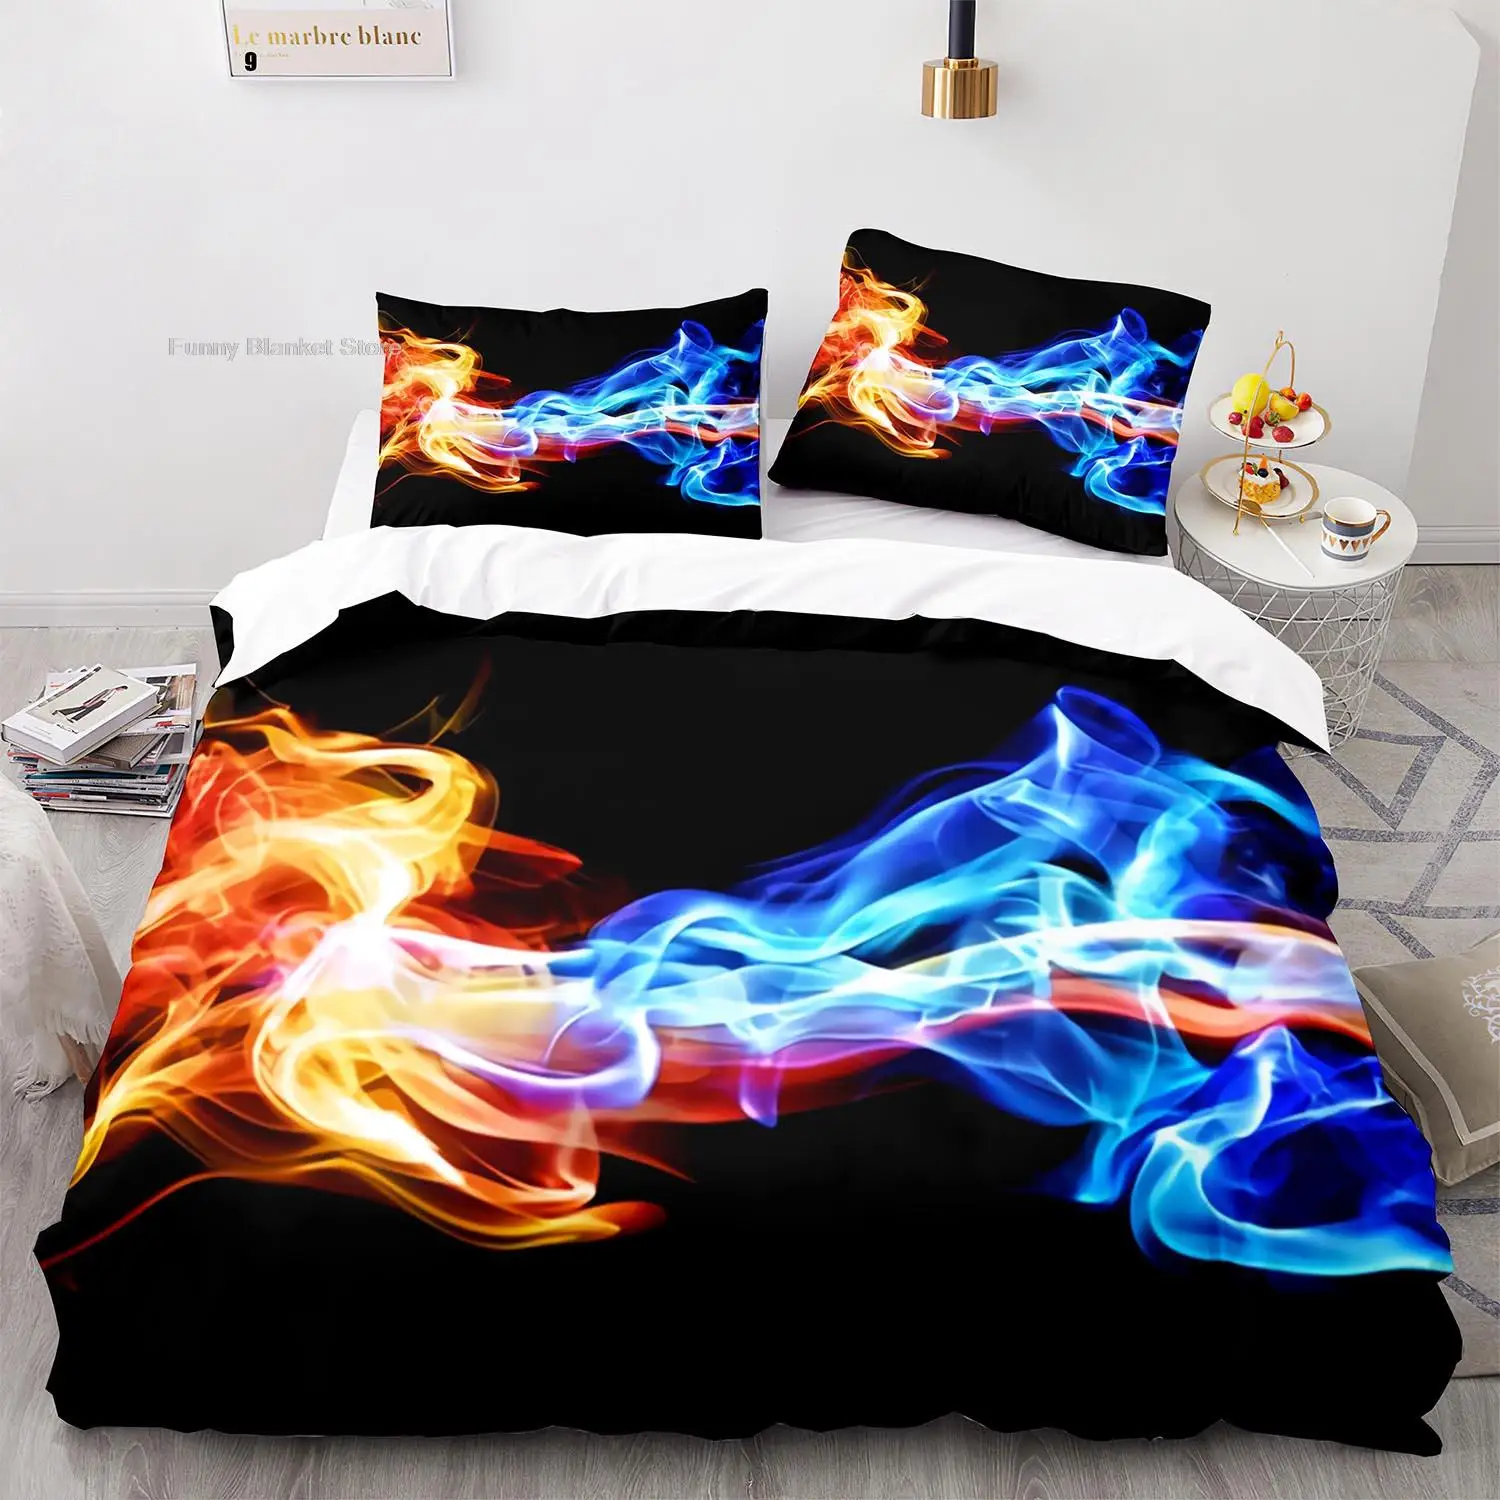 

Colorful Flame Bedding Set Single Twin Full Queen King Size Ice And Fire Blaze Bed Set Children Kid Kawaii Duvetcover Sets 002